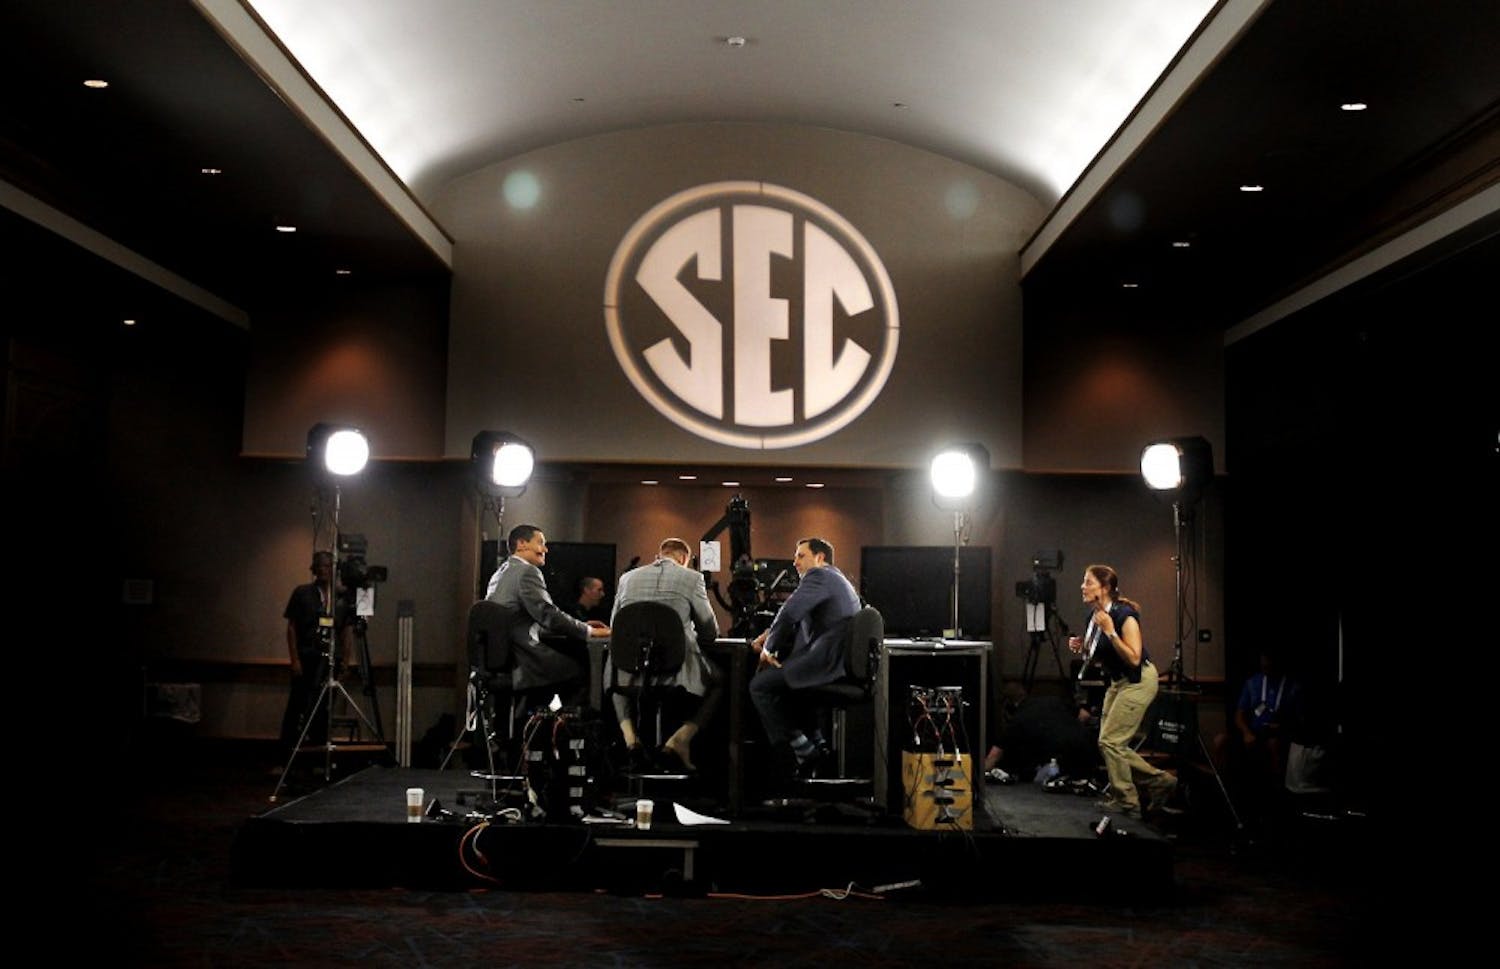 ESPN's presence was strong during SEC football media days in Hoover, Alabama. (Gerry Melendez/The State/MCT)